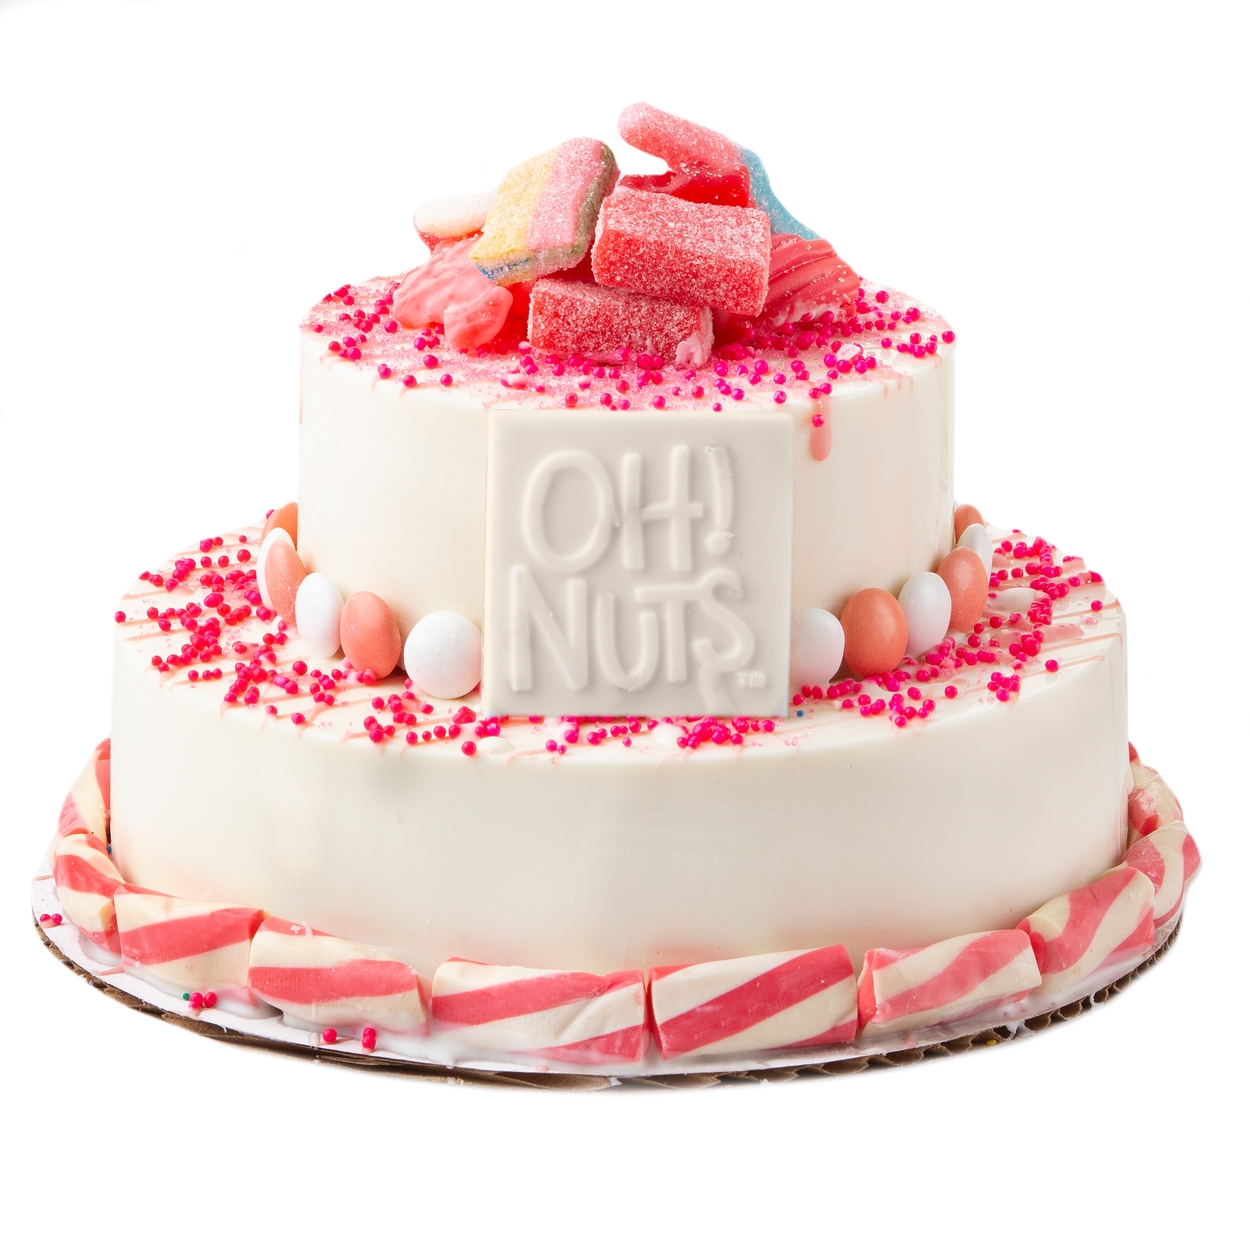 Best Cakes for birthday and desserts in Doha